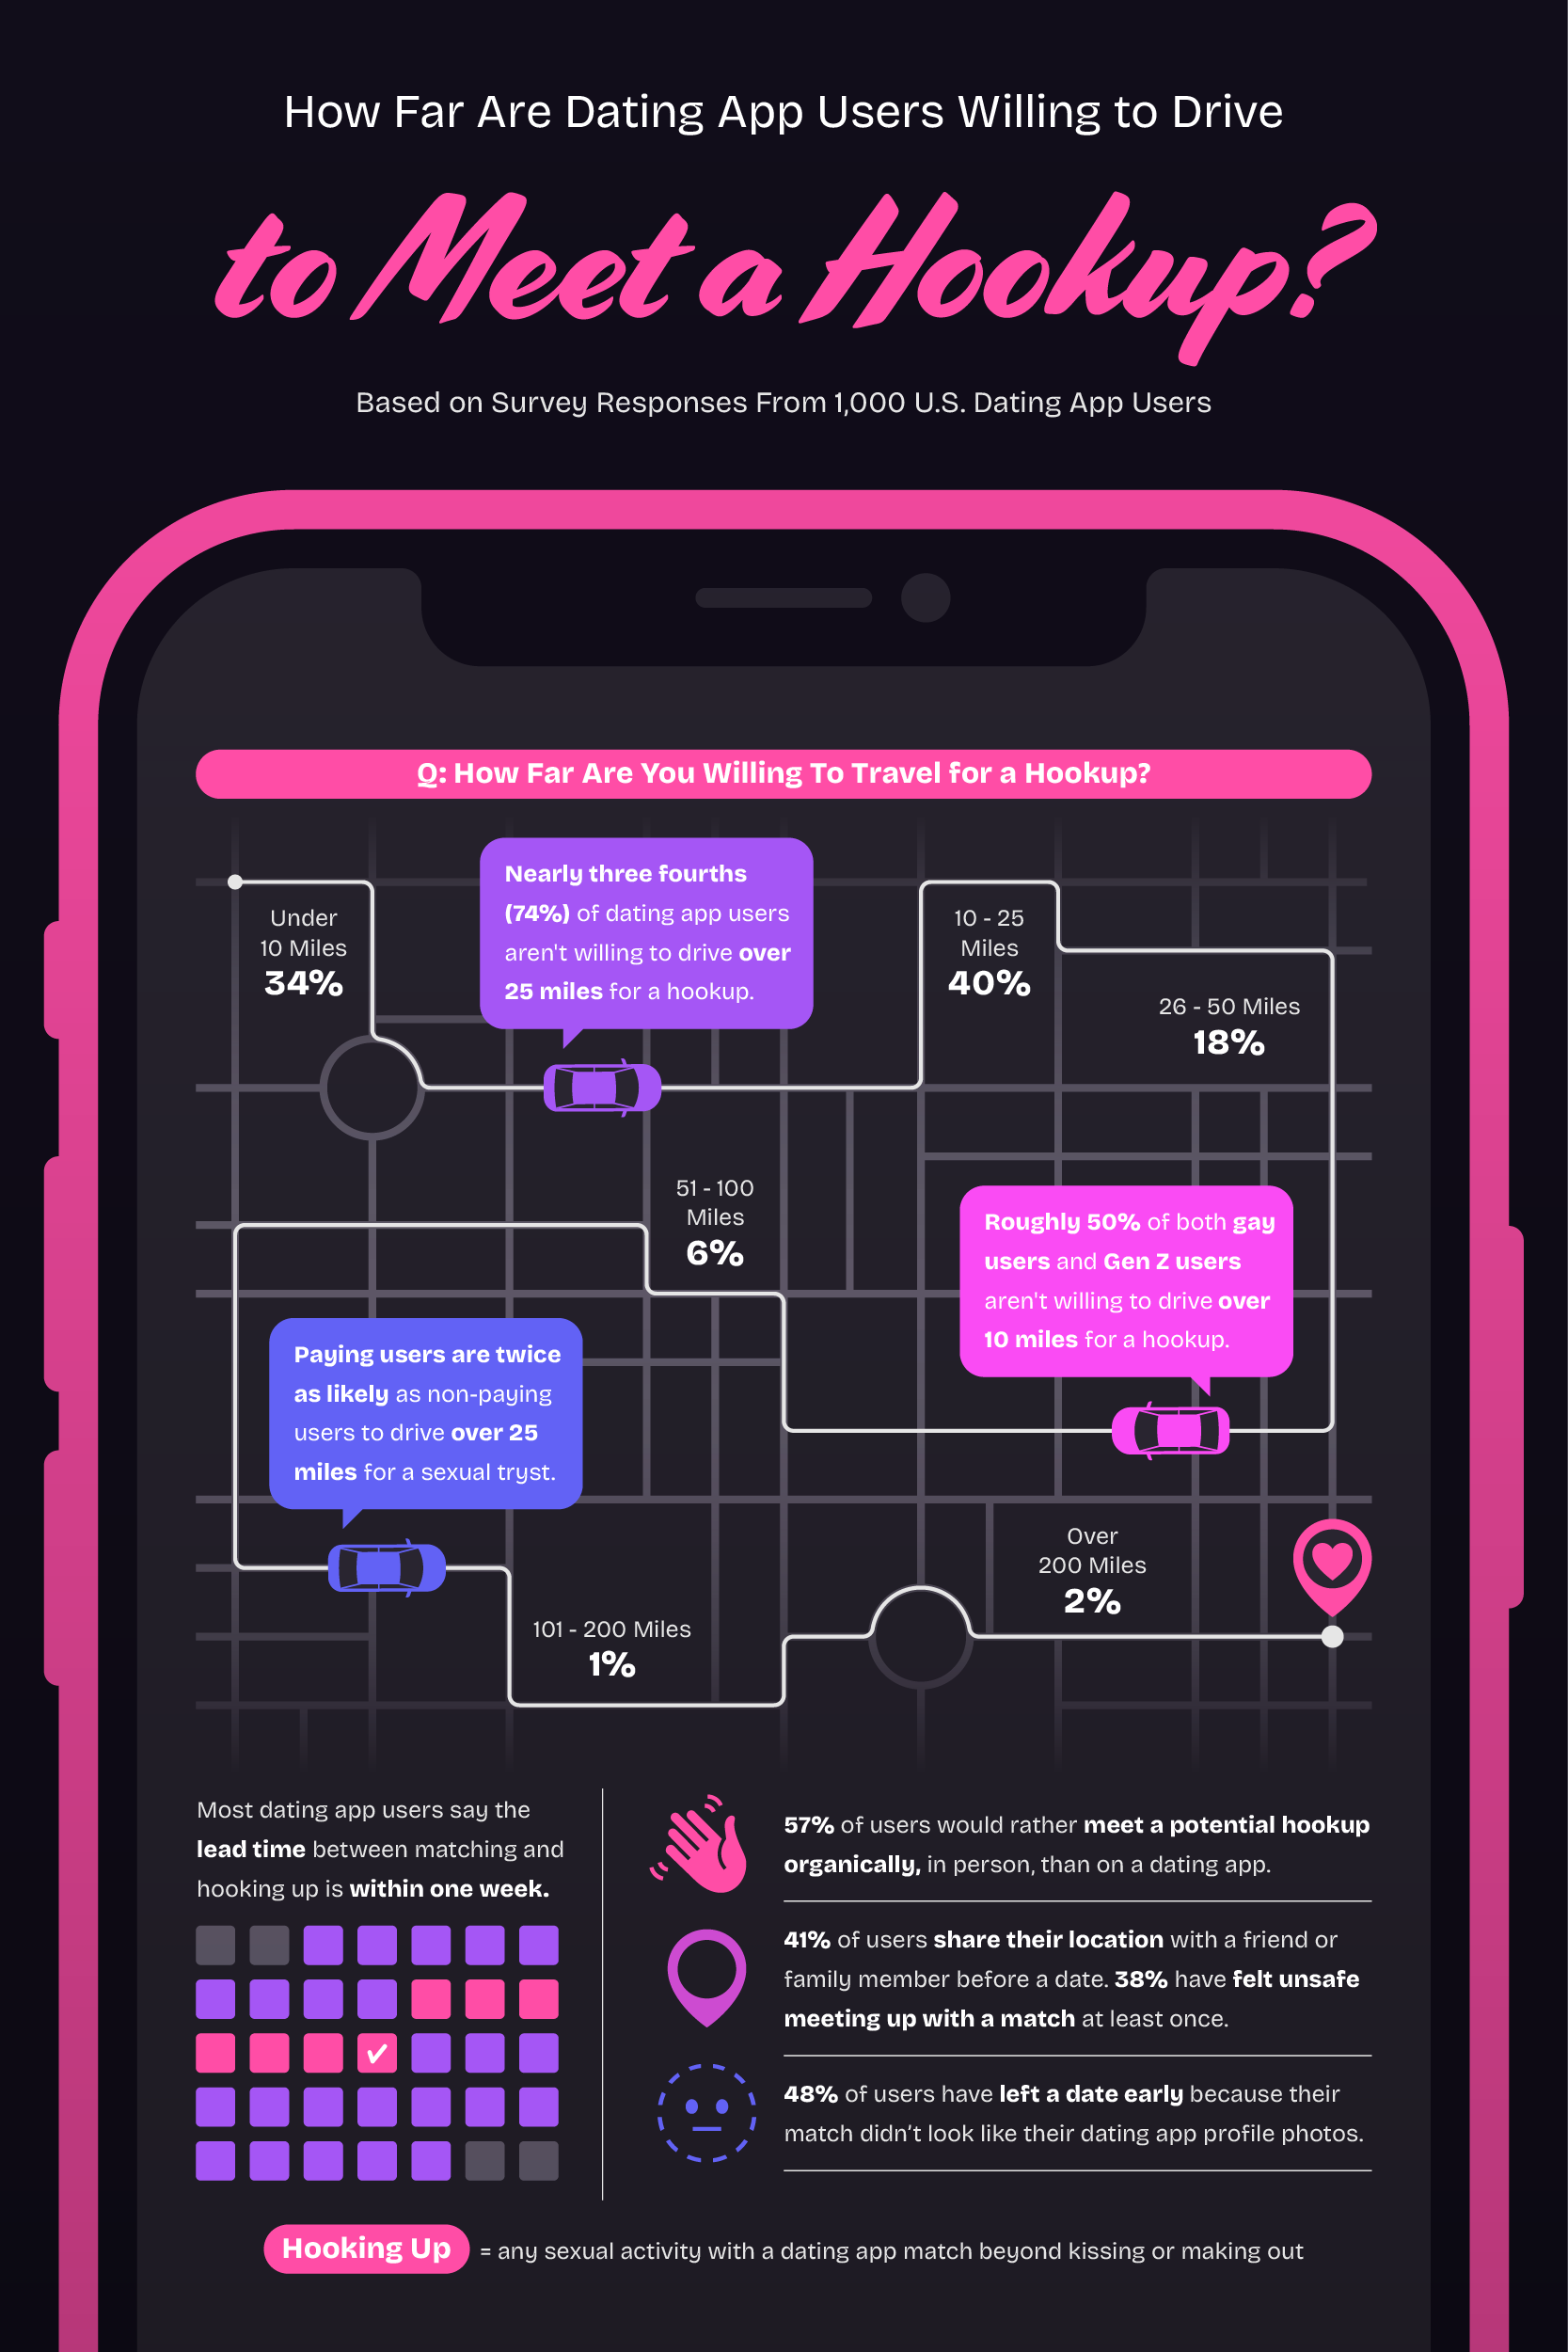 an infographic showing how far users will drive for a hookup and other dating app statistics